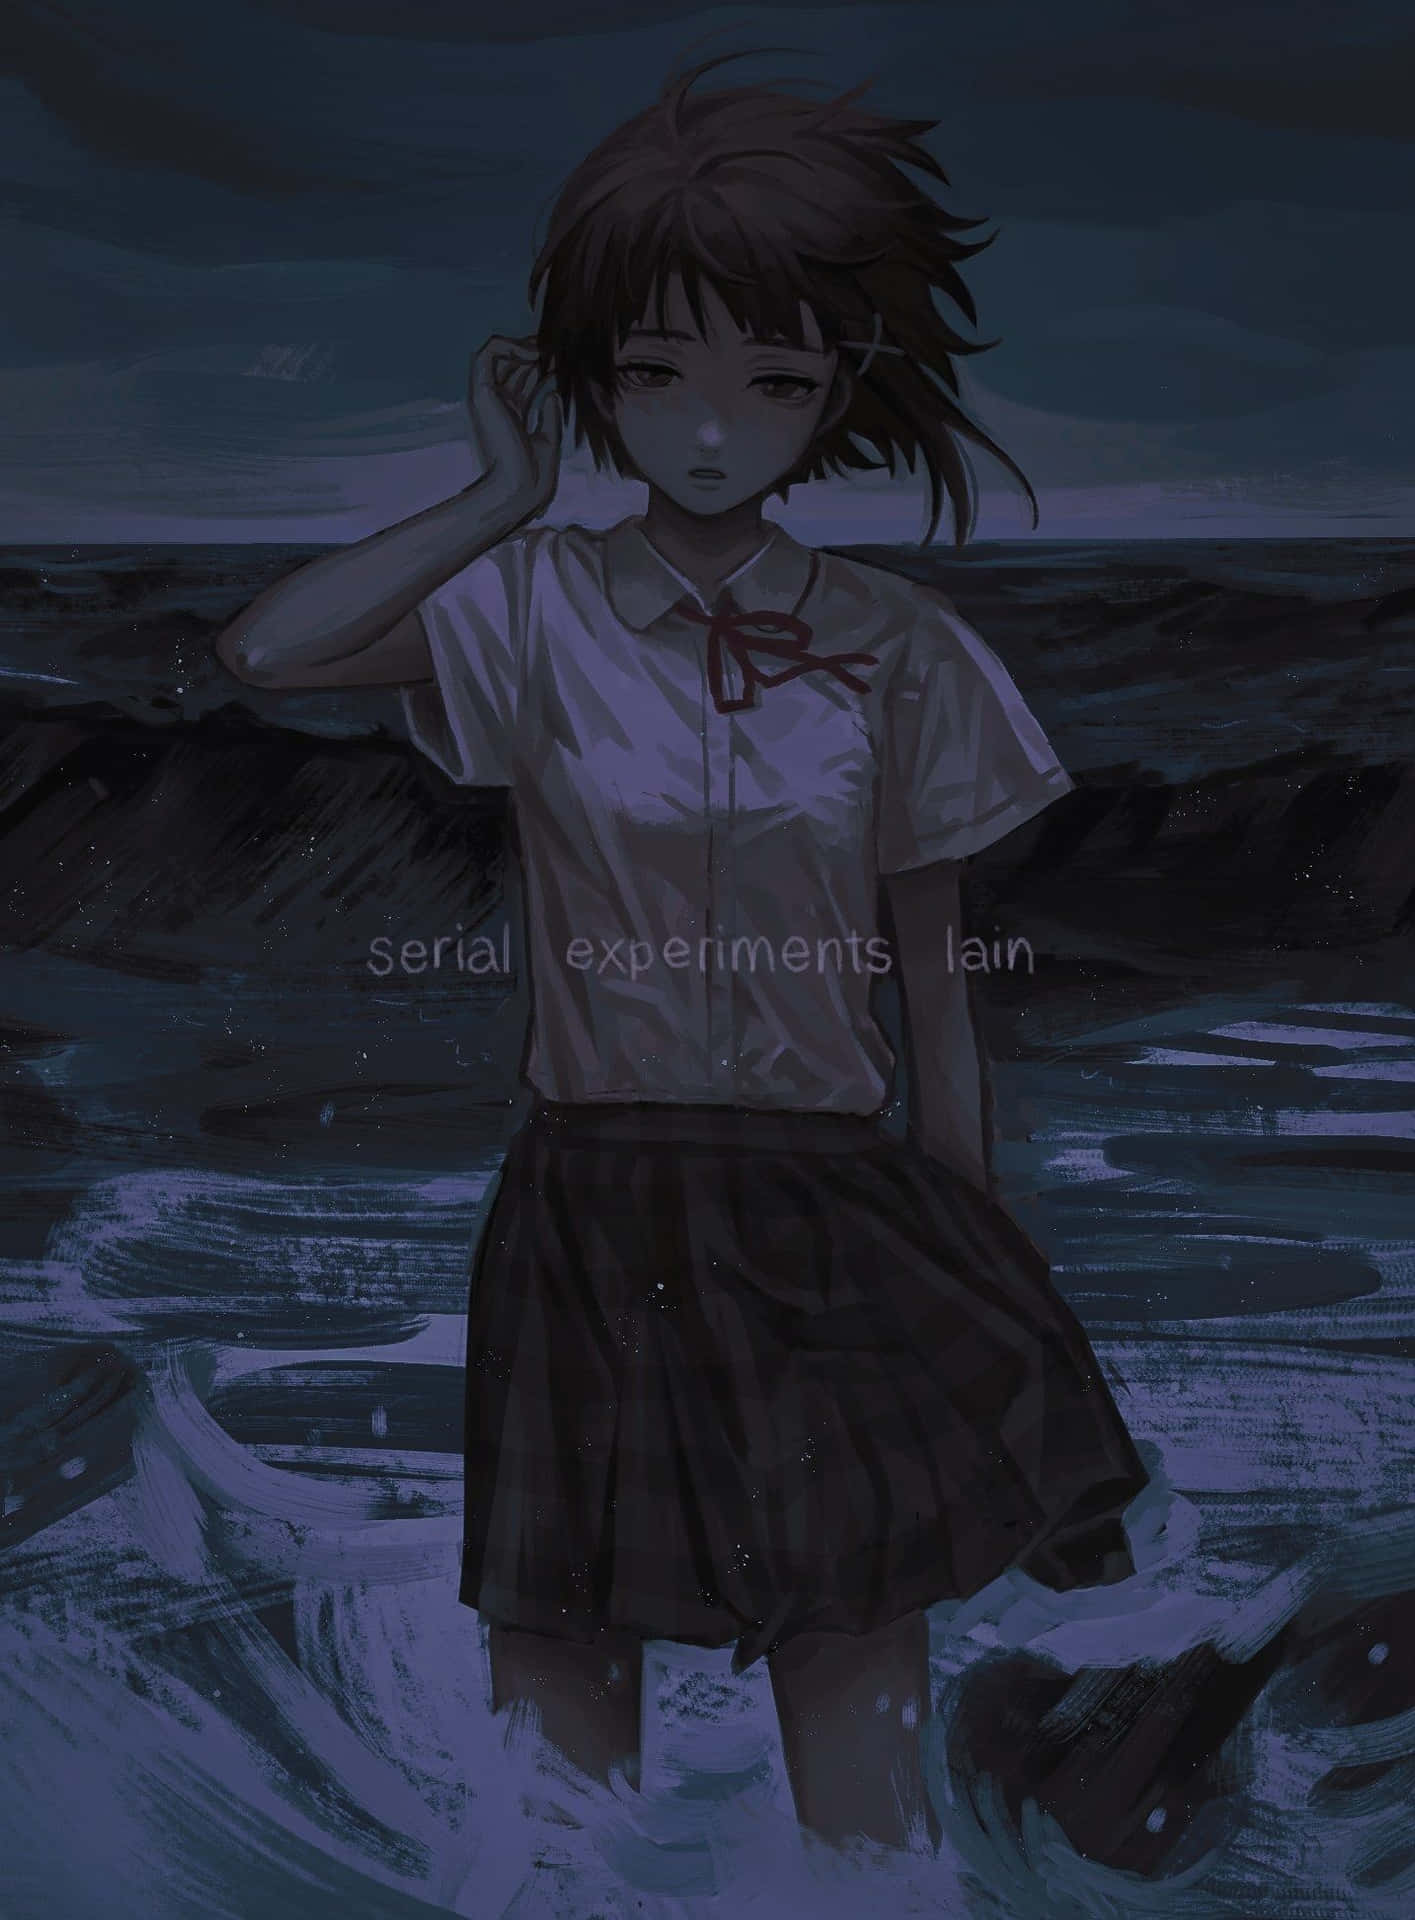 A Mysterious Day in the Digital World of Serial Experiments Lain Wallpaper